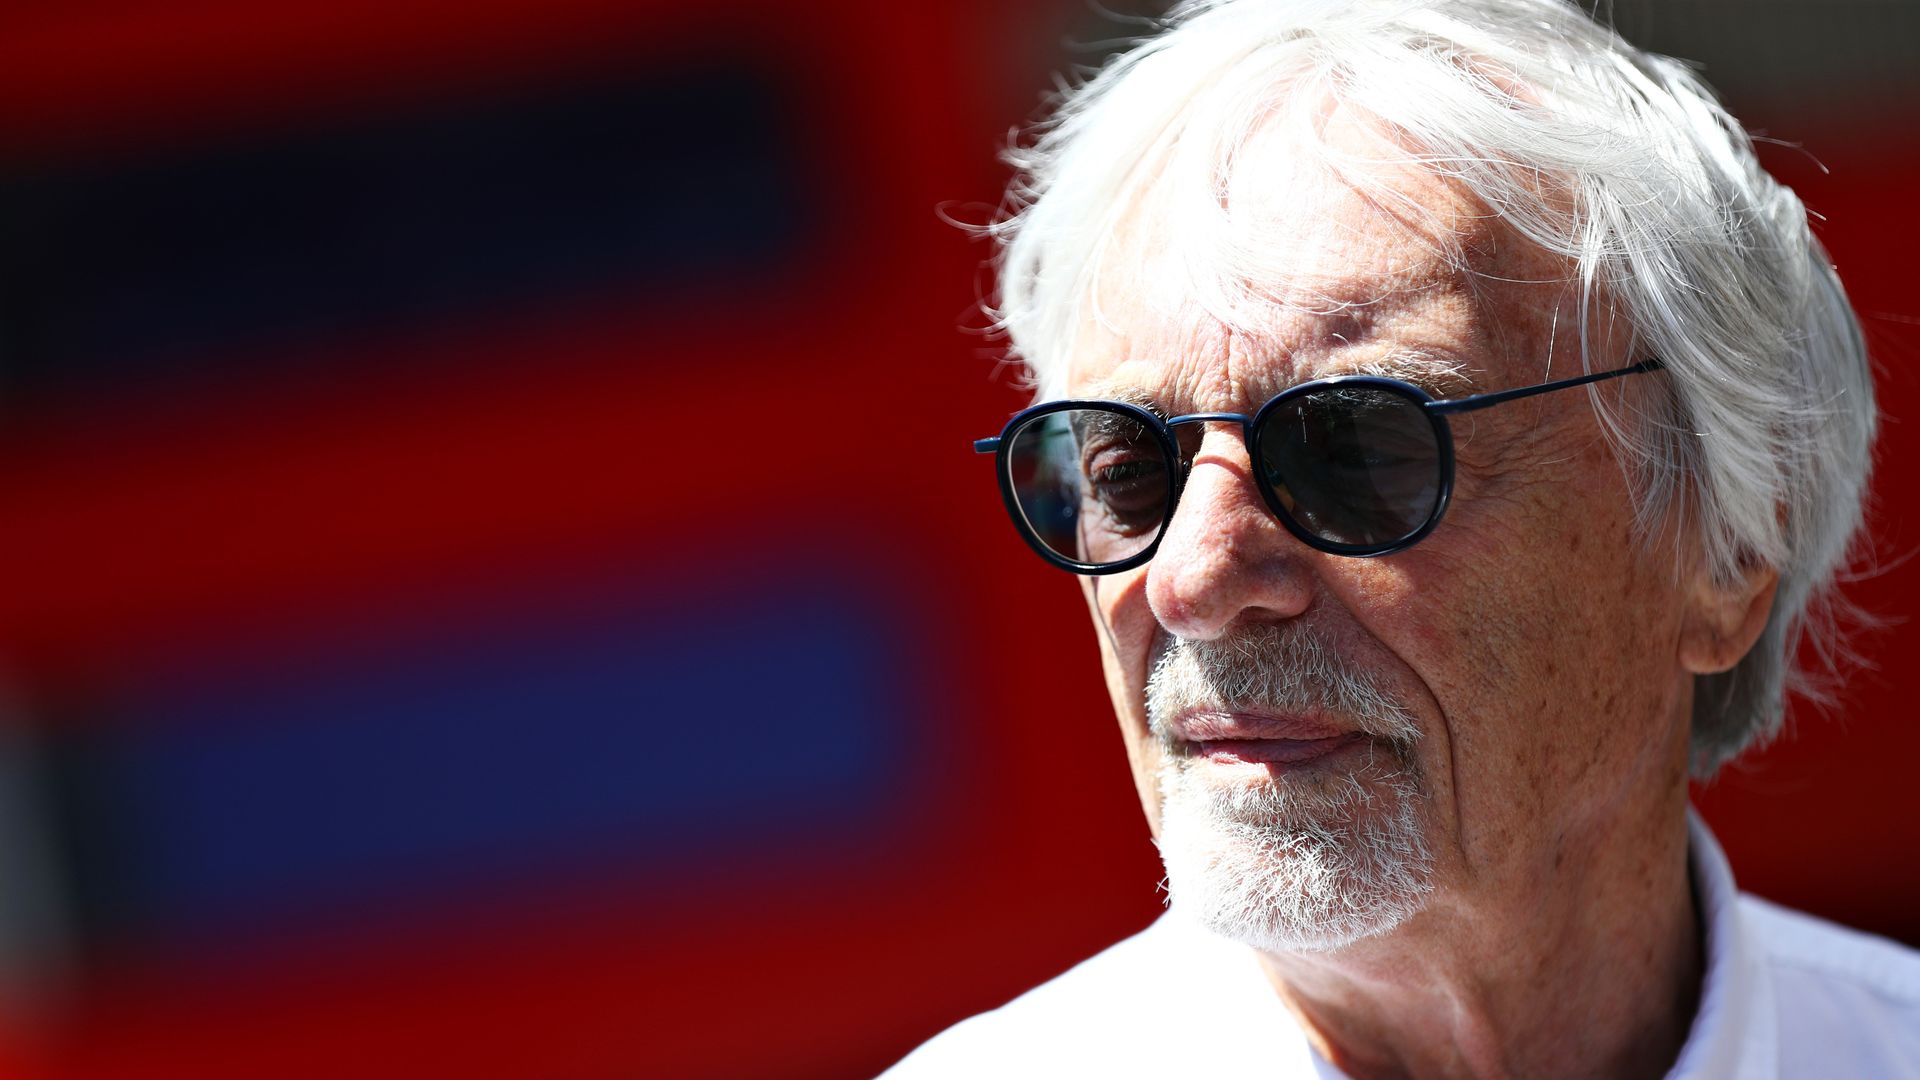 Ecclestone arrested in Brazil for illegally carrying a gun